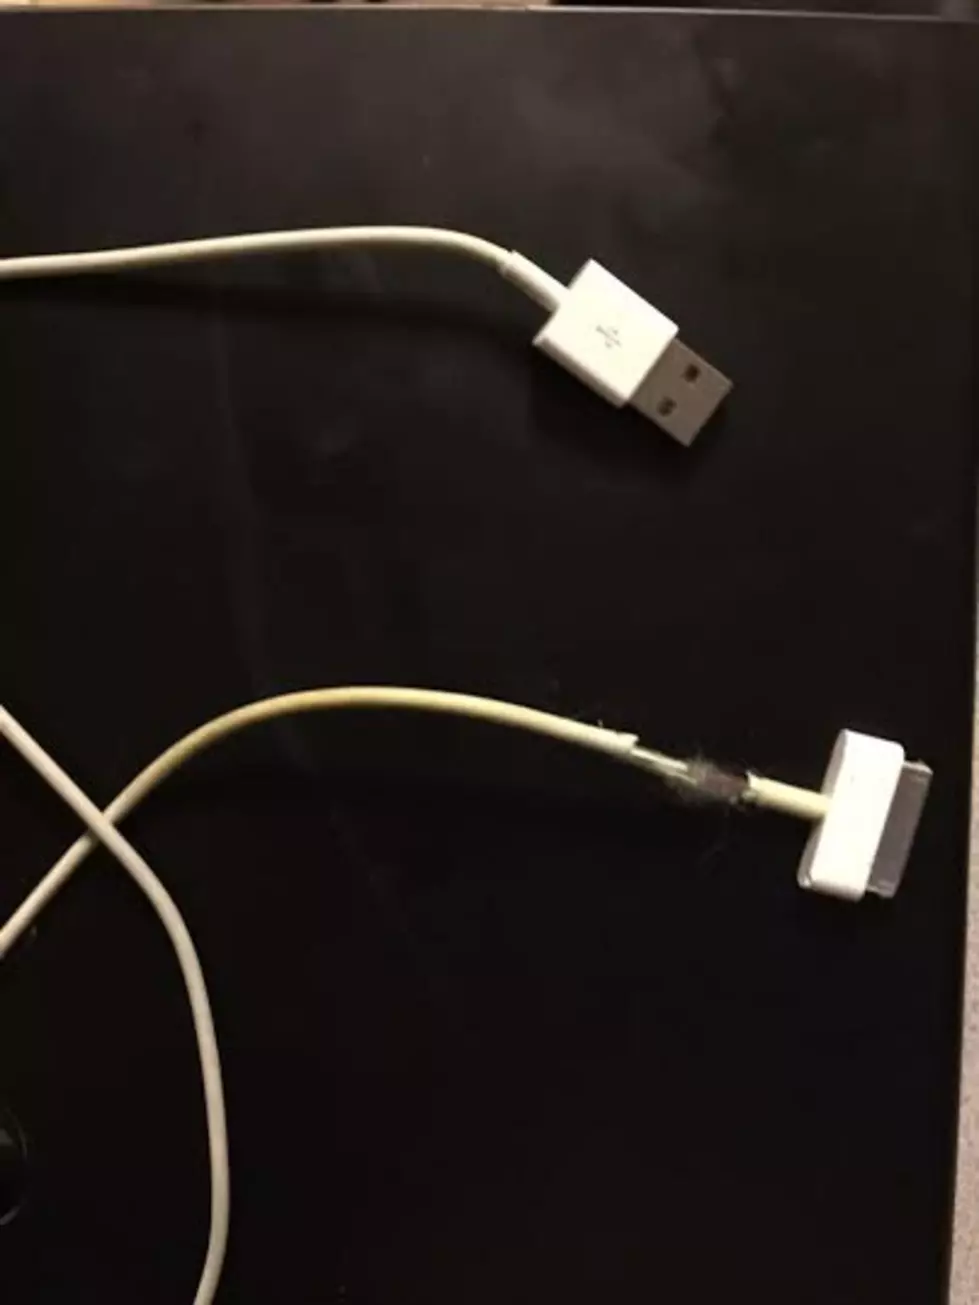 Save Your Ipad Charger [VIDEO]